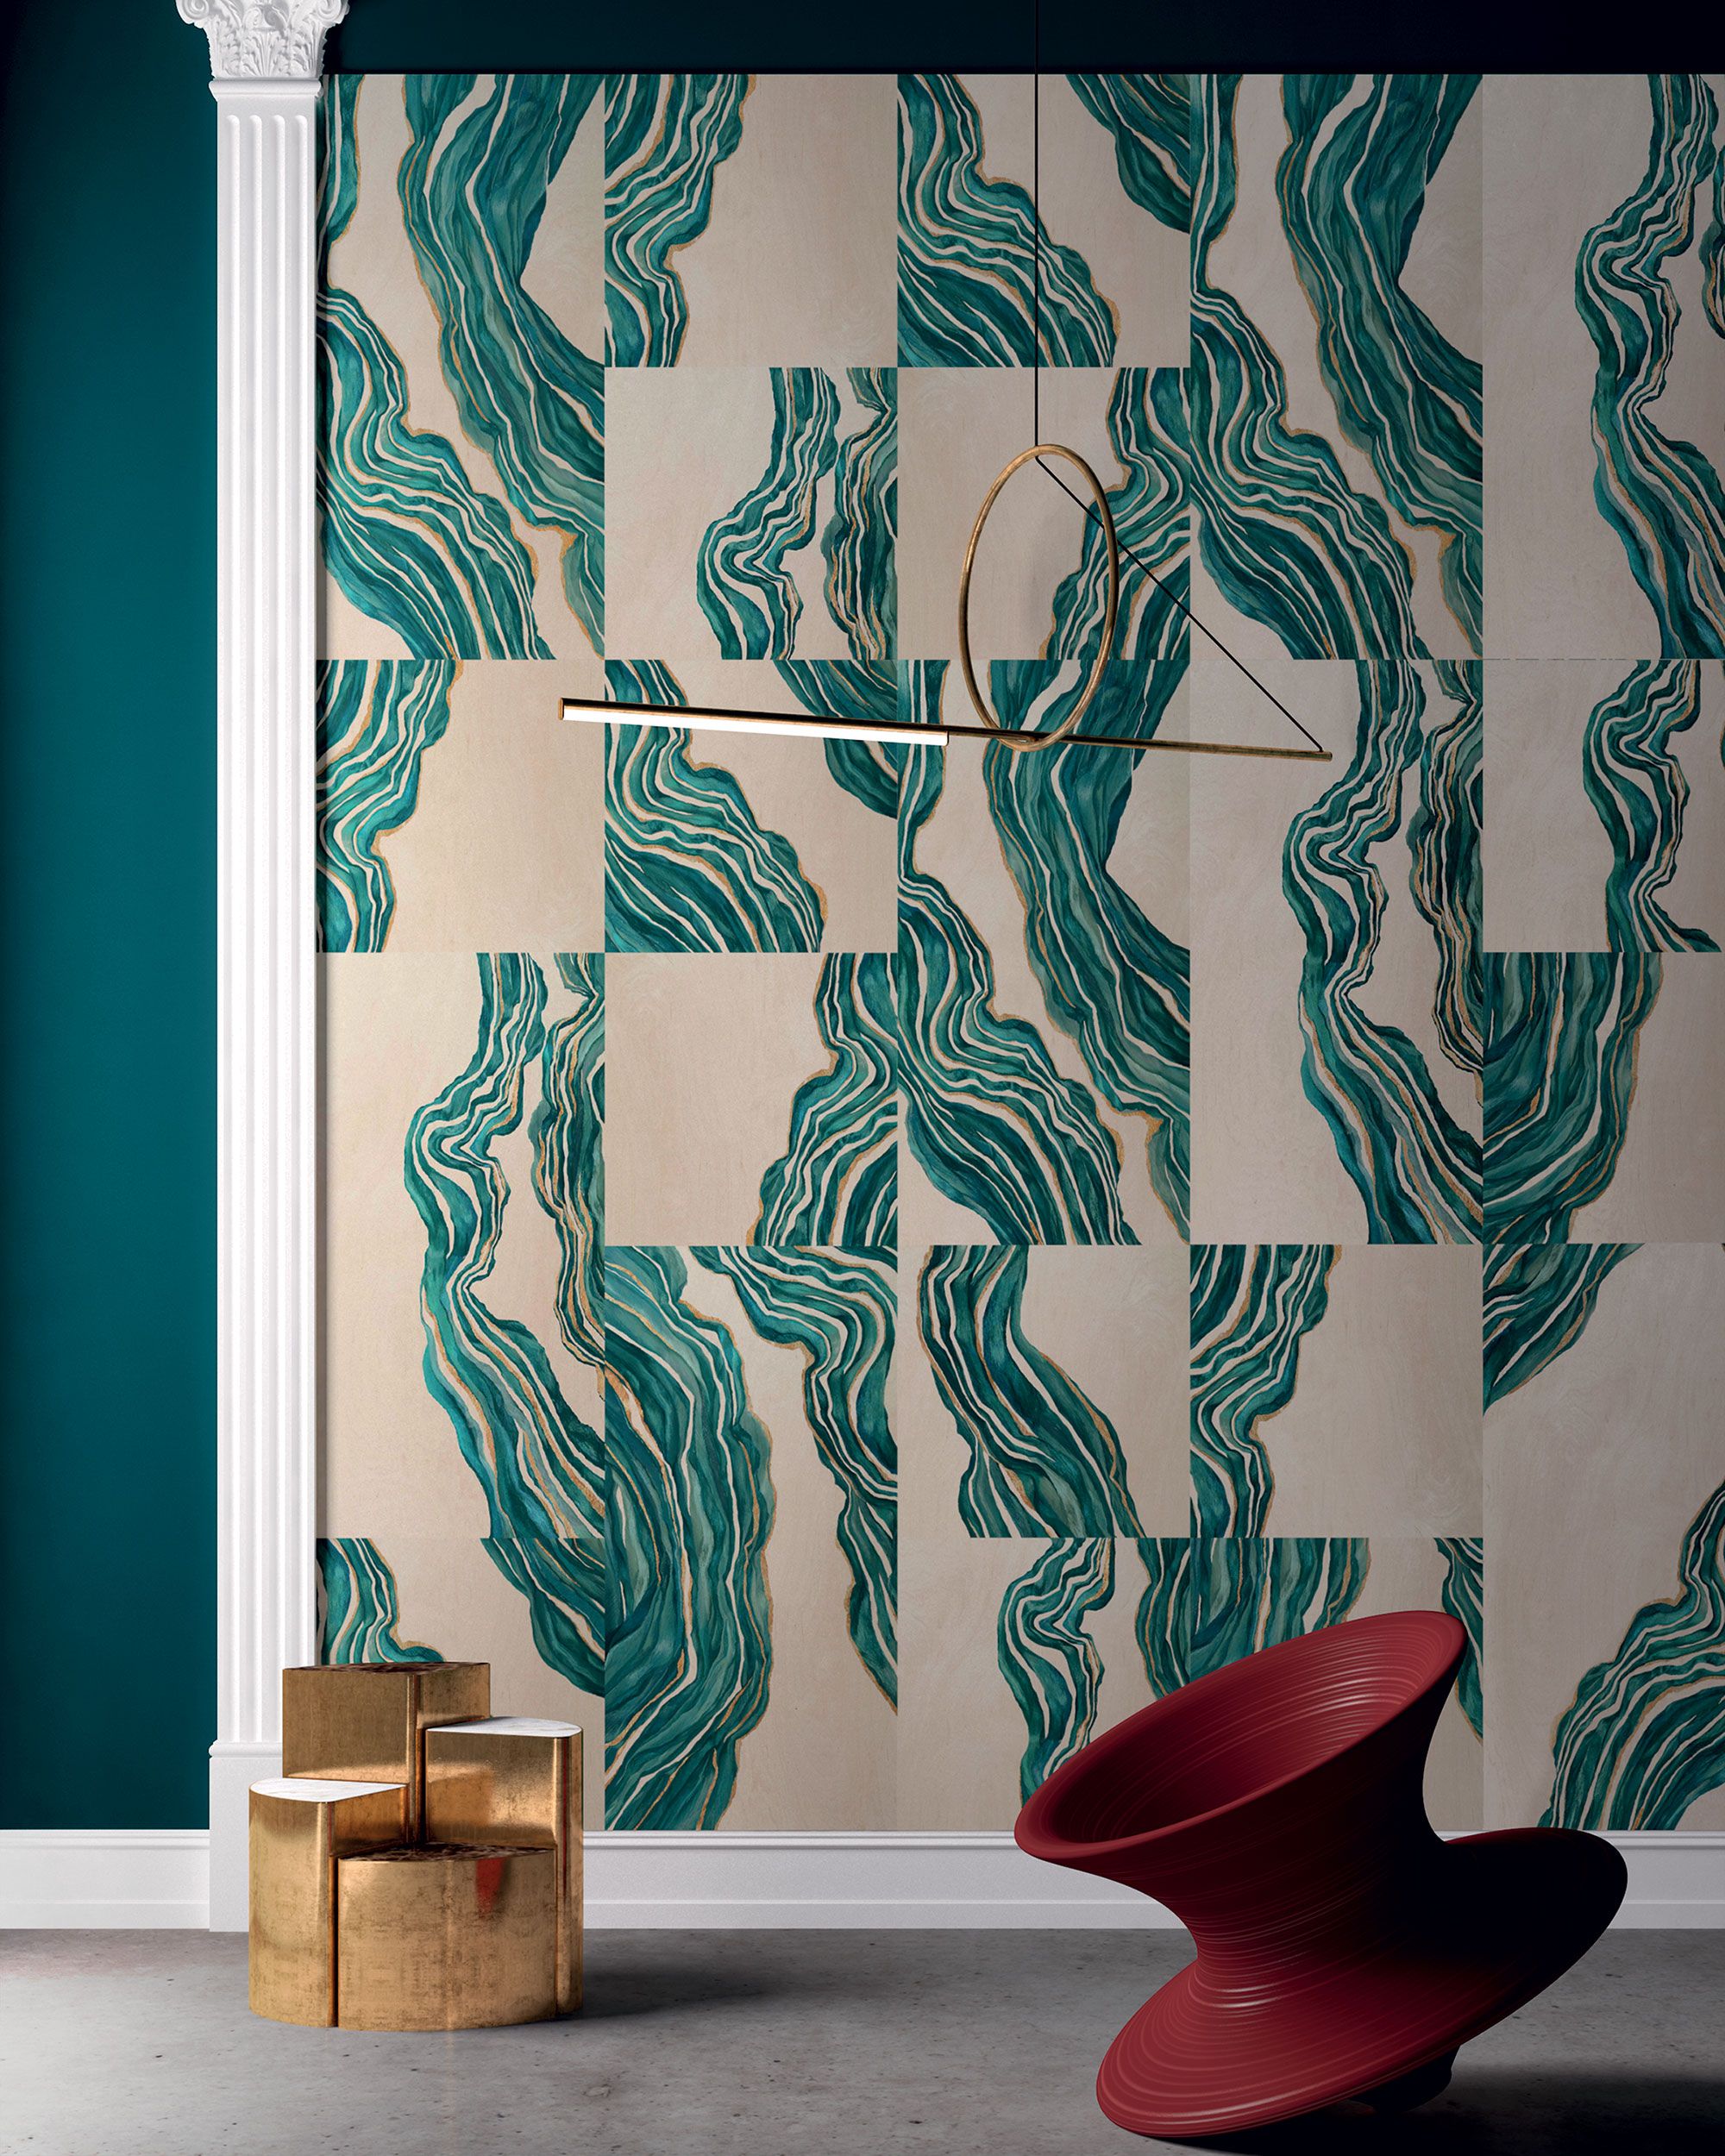 Involving and exciting: the new role of wallpaper